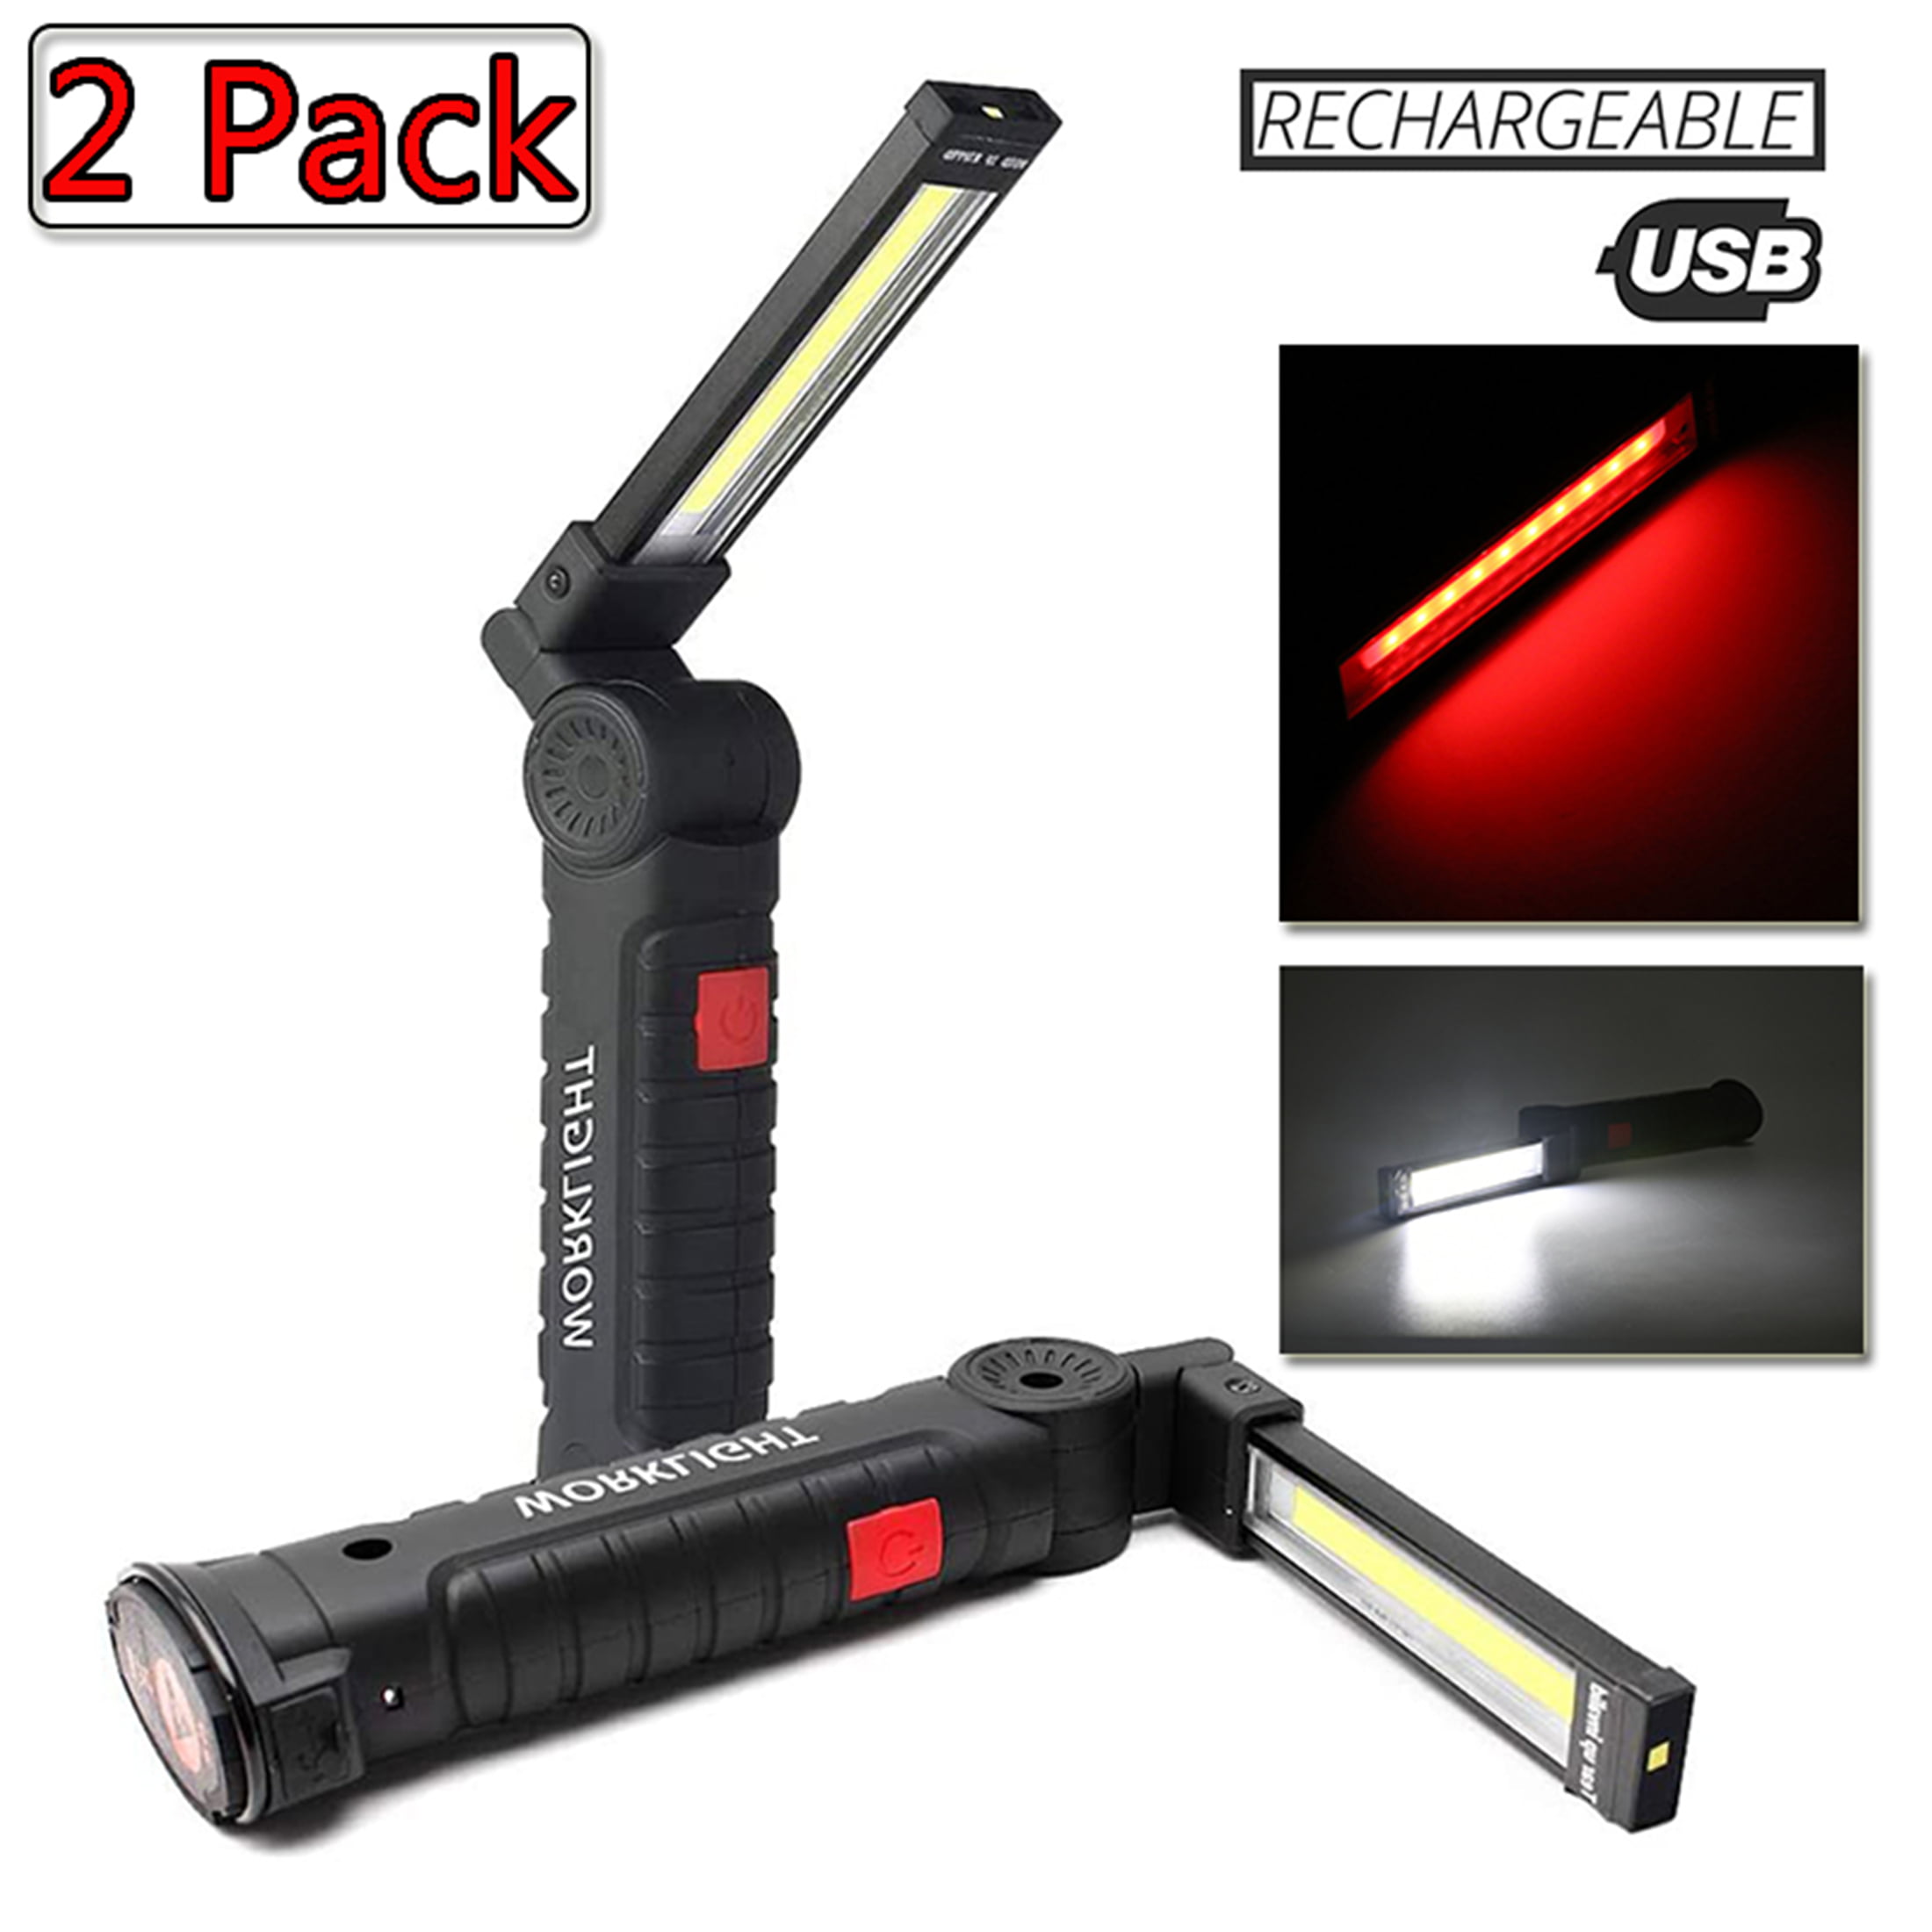 2x Rechargeable COB LED Work Light Flashlight Lamp Torch With USB Cable Workshop 